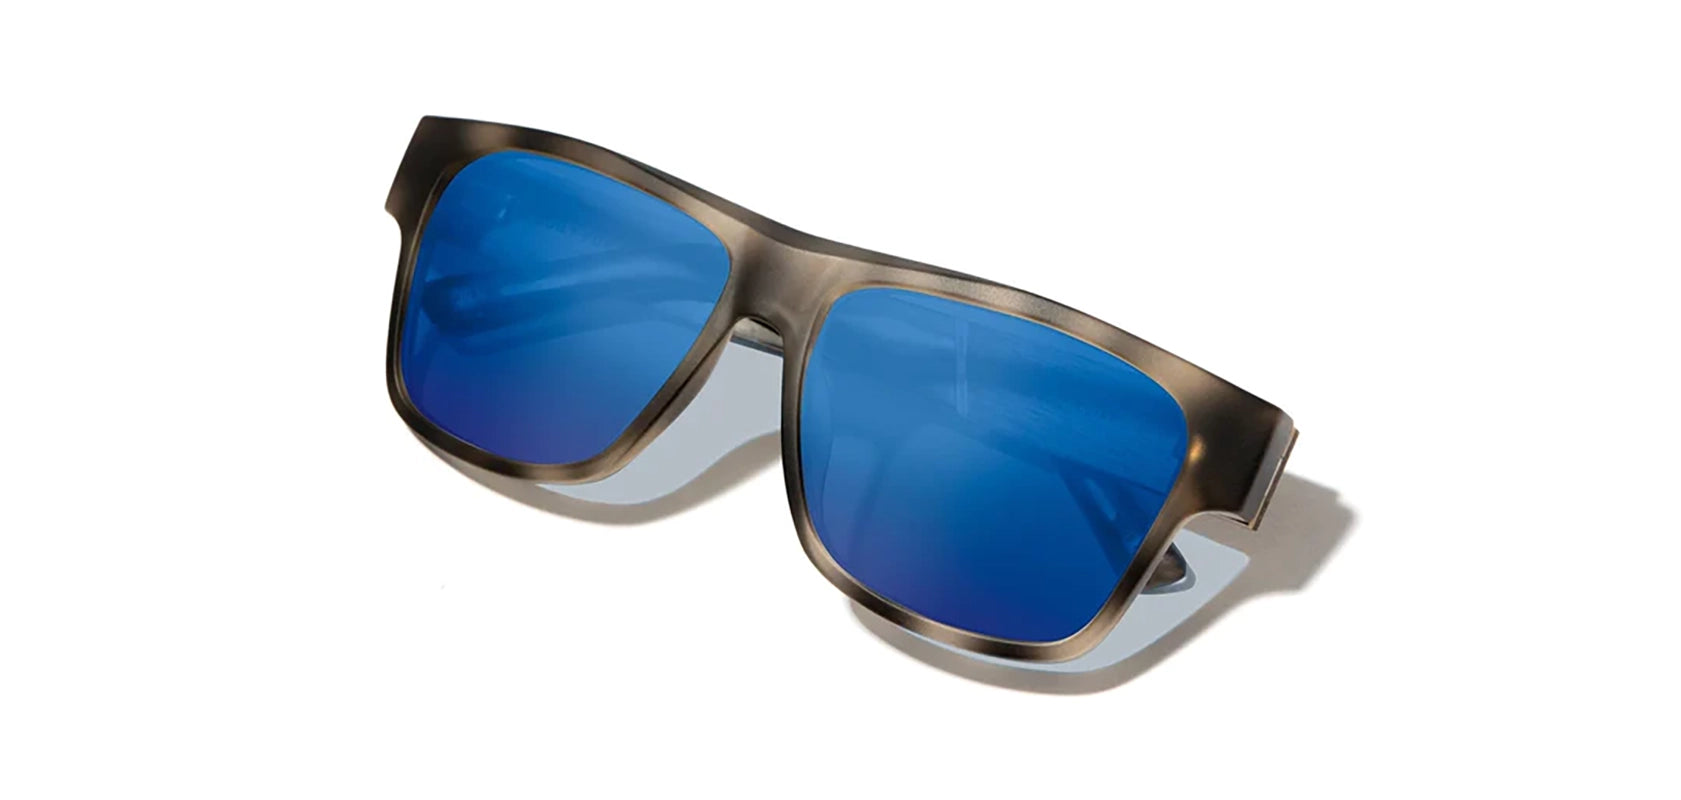 Shwood Camp- Cliff Sunglasses in Matte Grey Pearl / Walnut frames with HD polarized plus Blue Flash lenses, front angled closed view